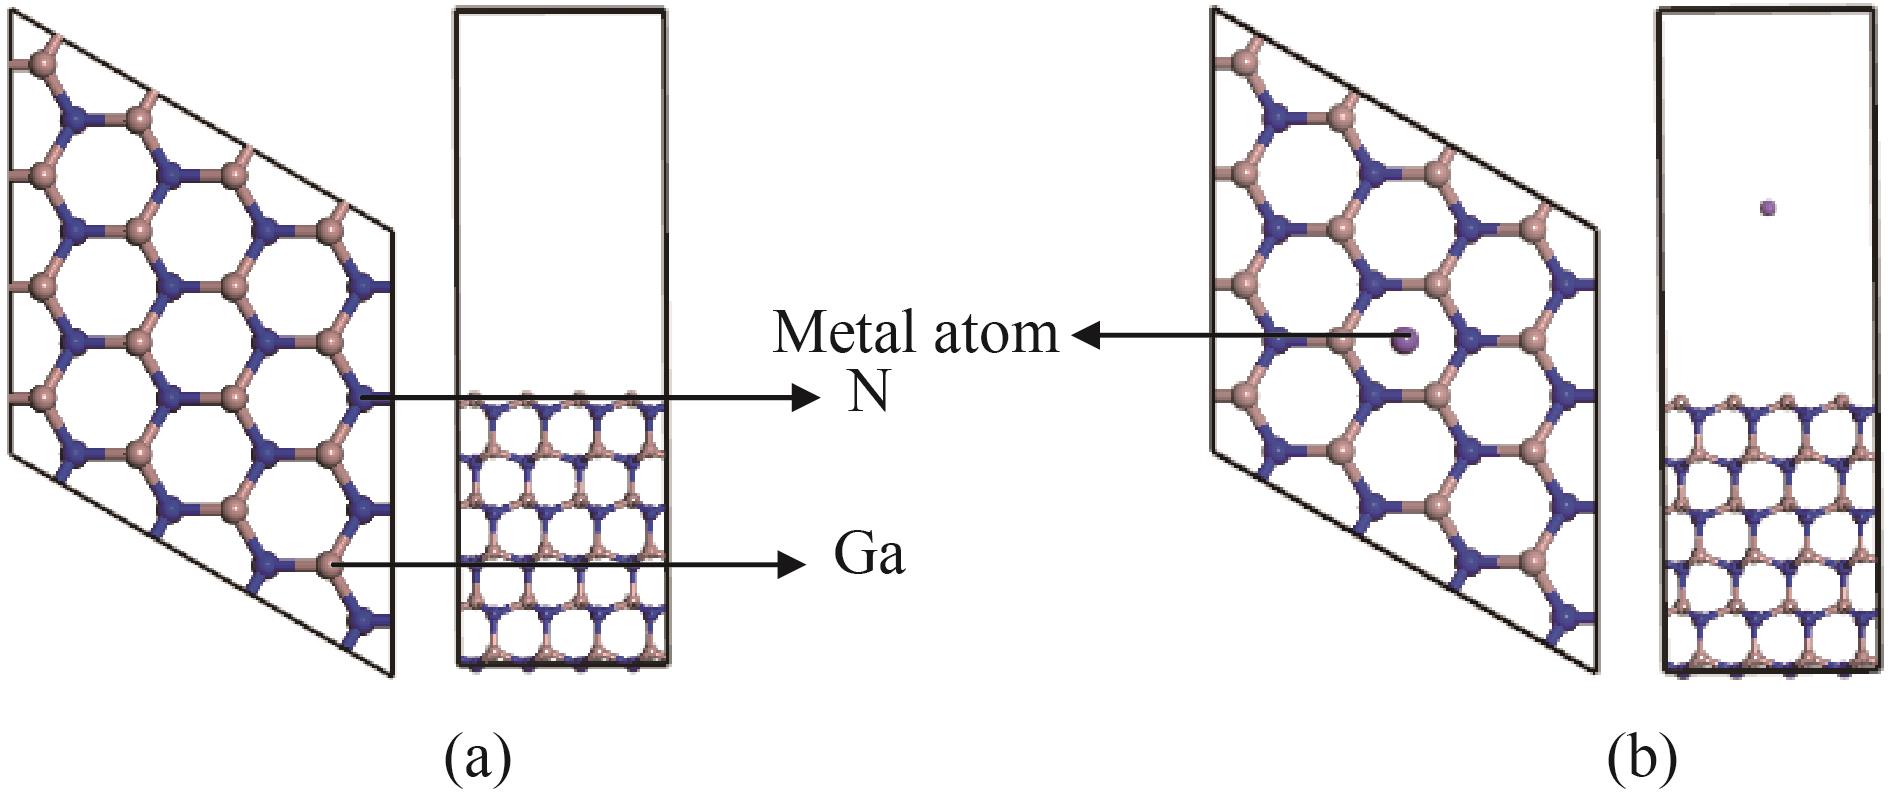 The 4×4×3 structures of （a） pristine GaN（0001） surface, and （b） GaN（0001） surface adsorbed with metal atom. （Adatoms occupy the center of the hexagon）